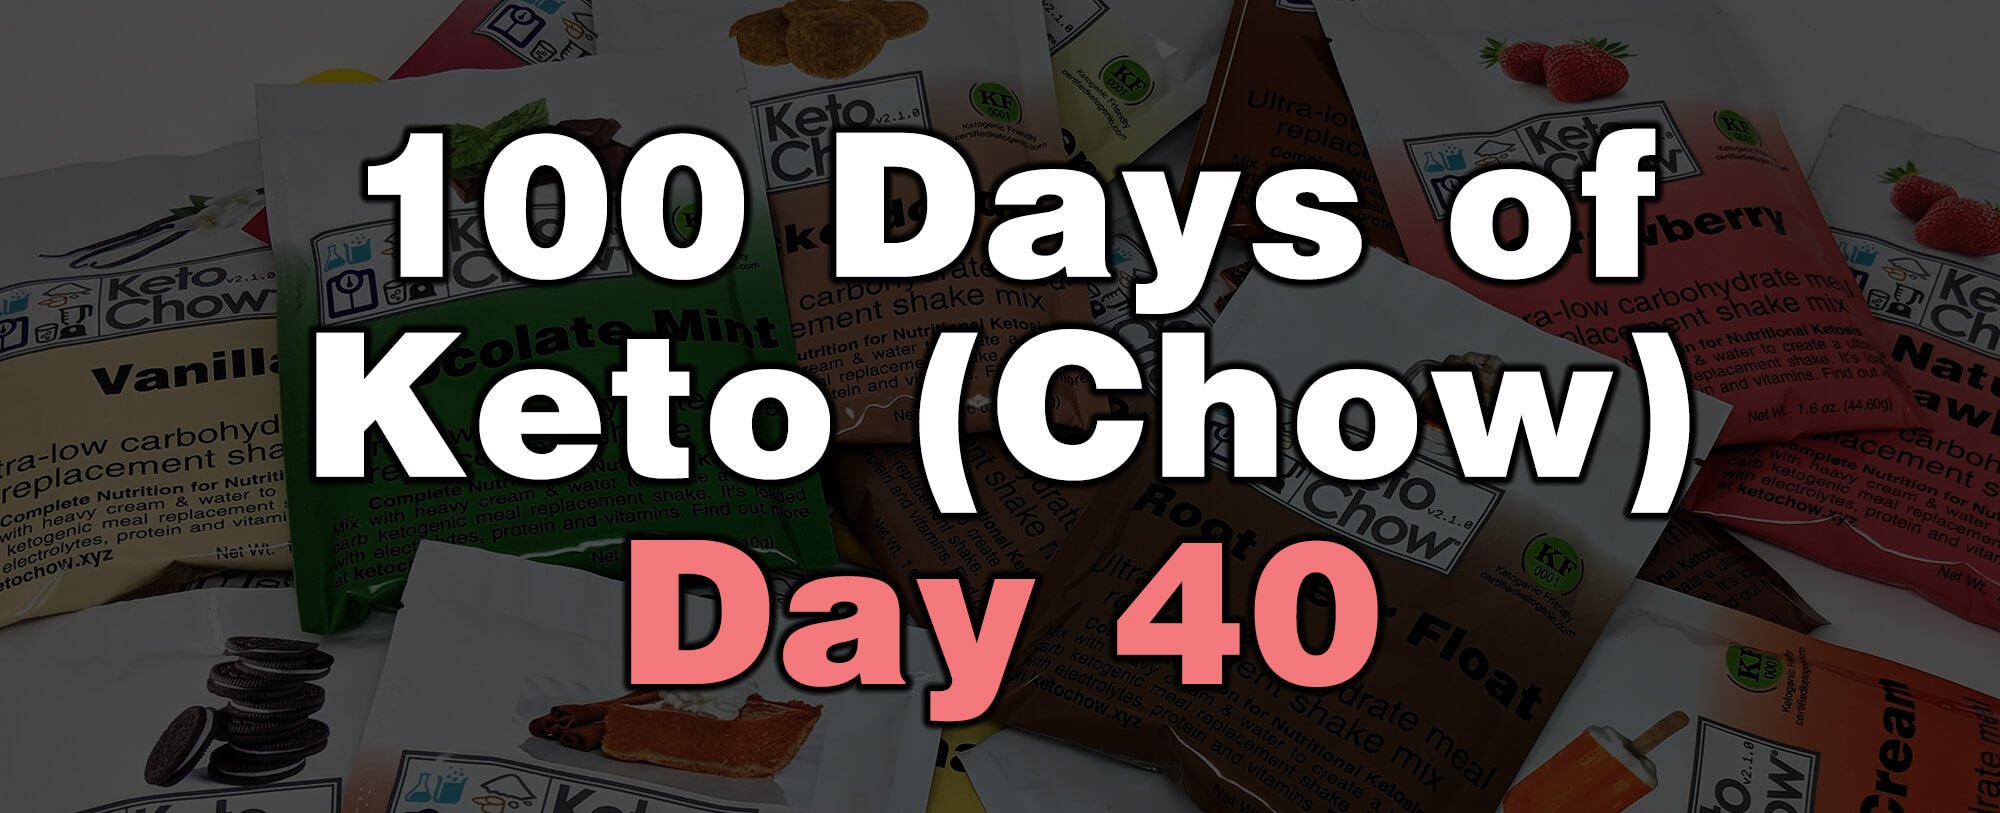 100 days of keto chow day 40